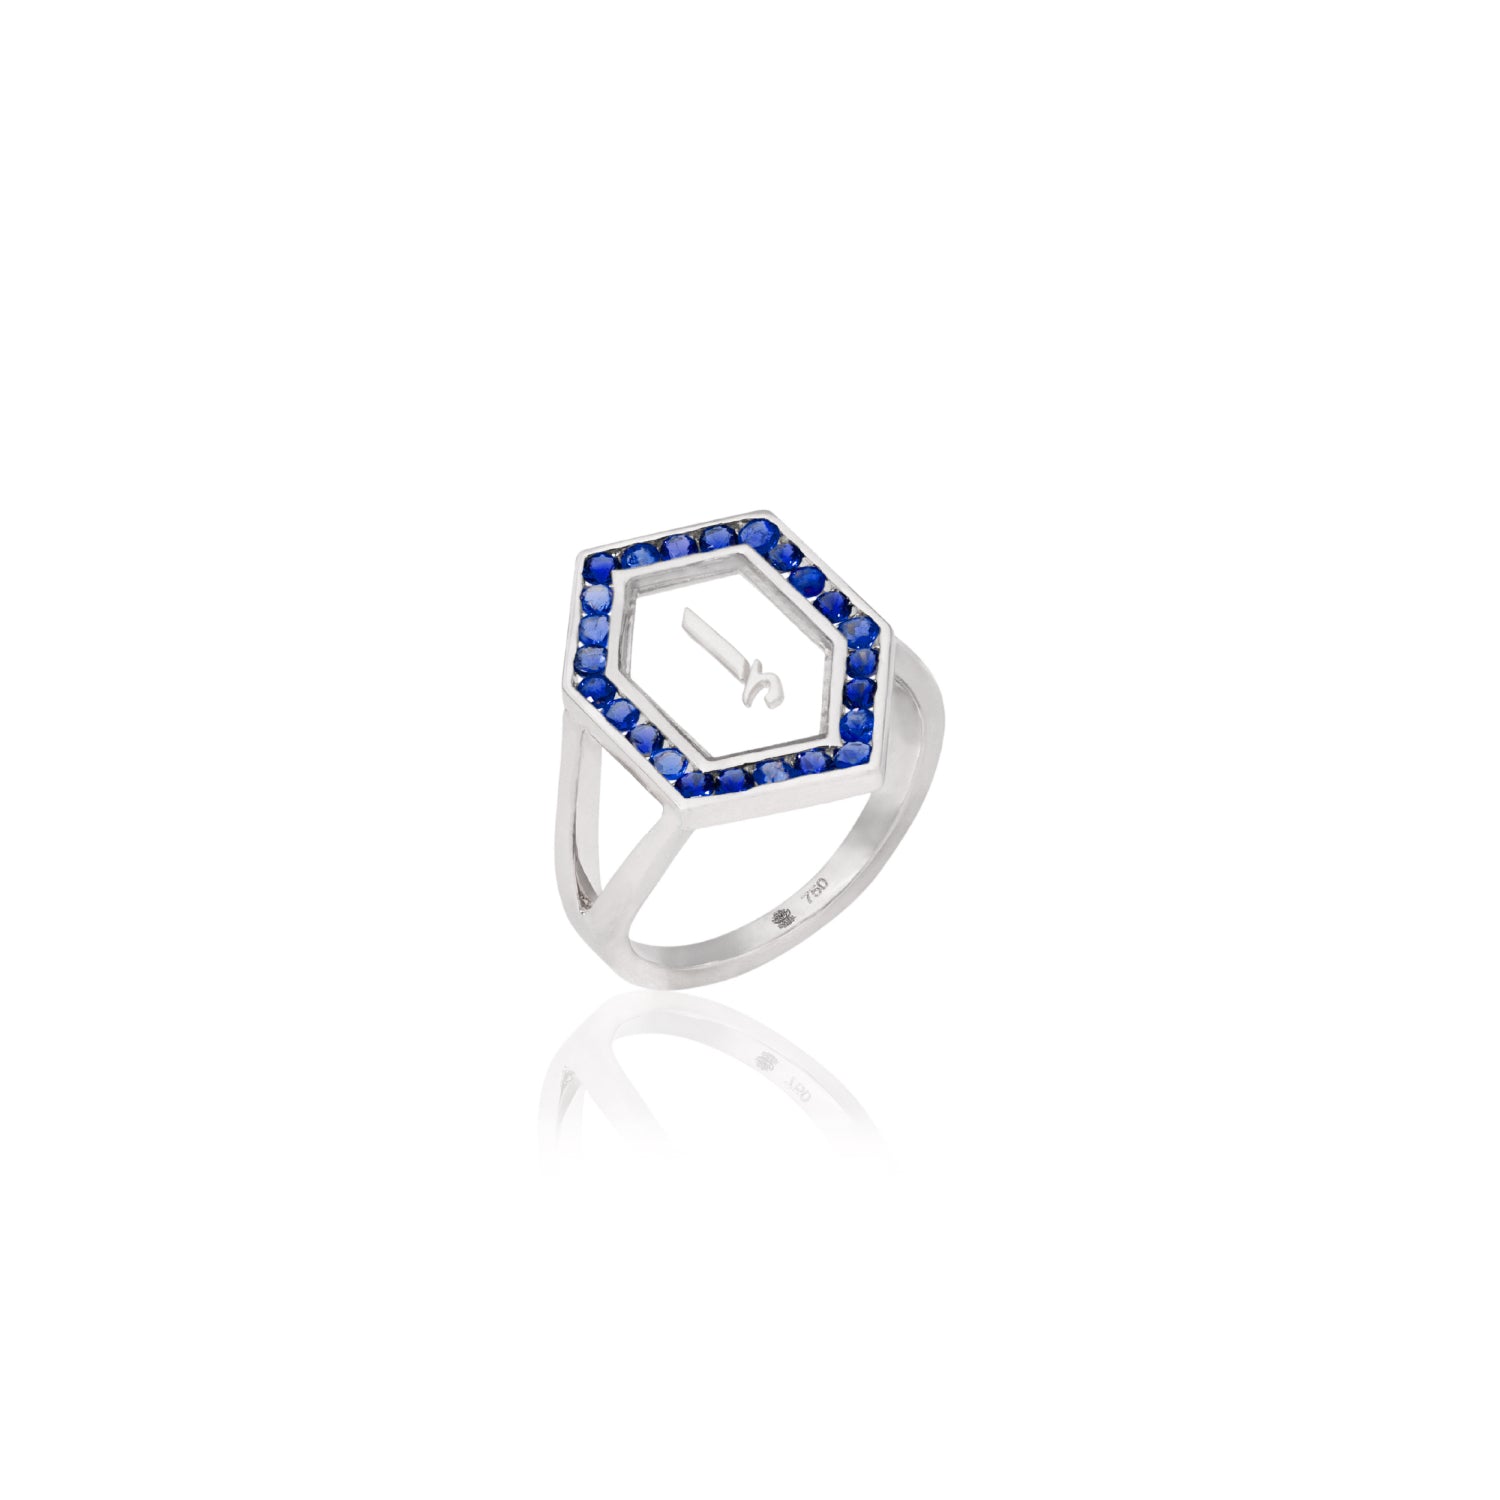 Qamoos 1.0 Letter إ Sapphire Ring in White Gold